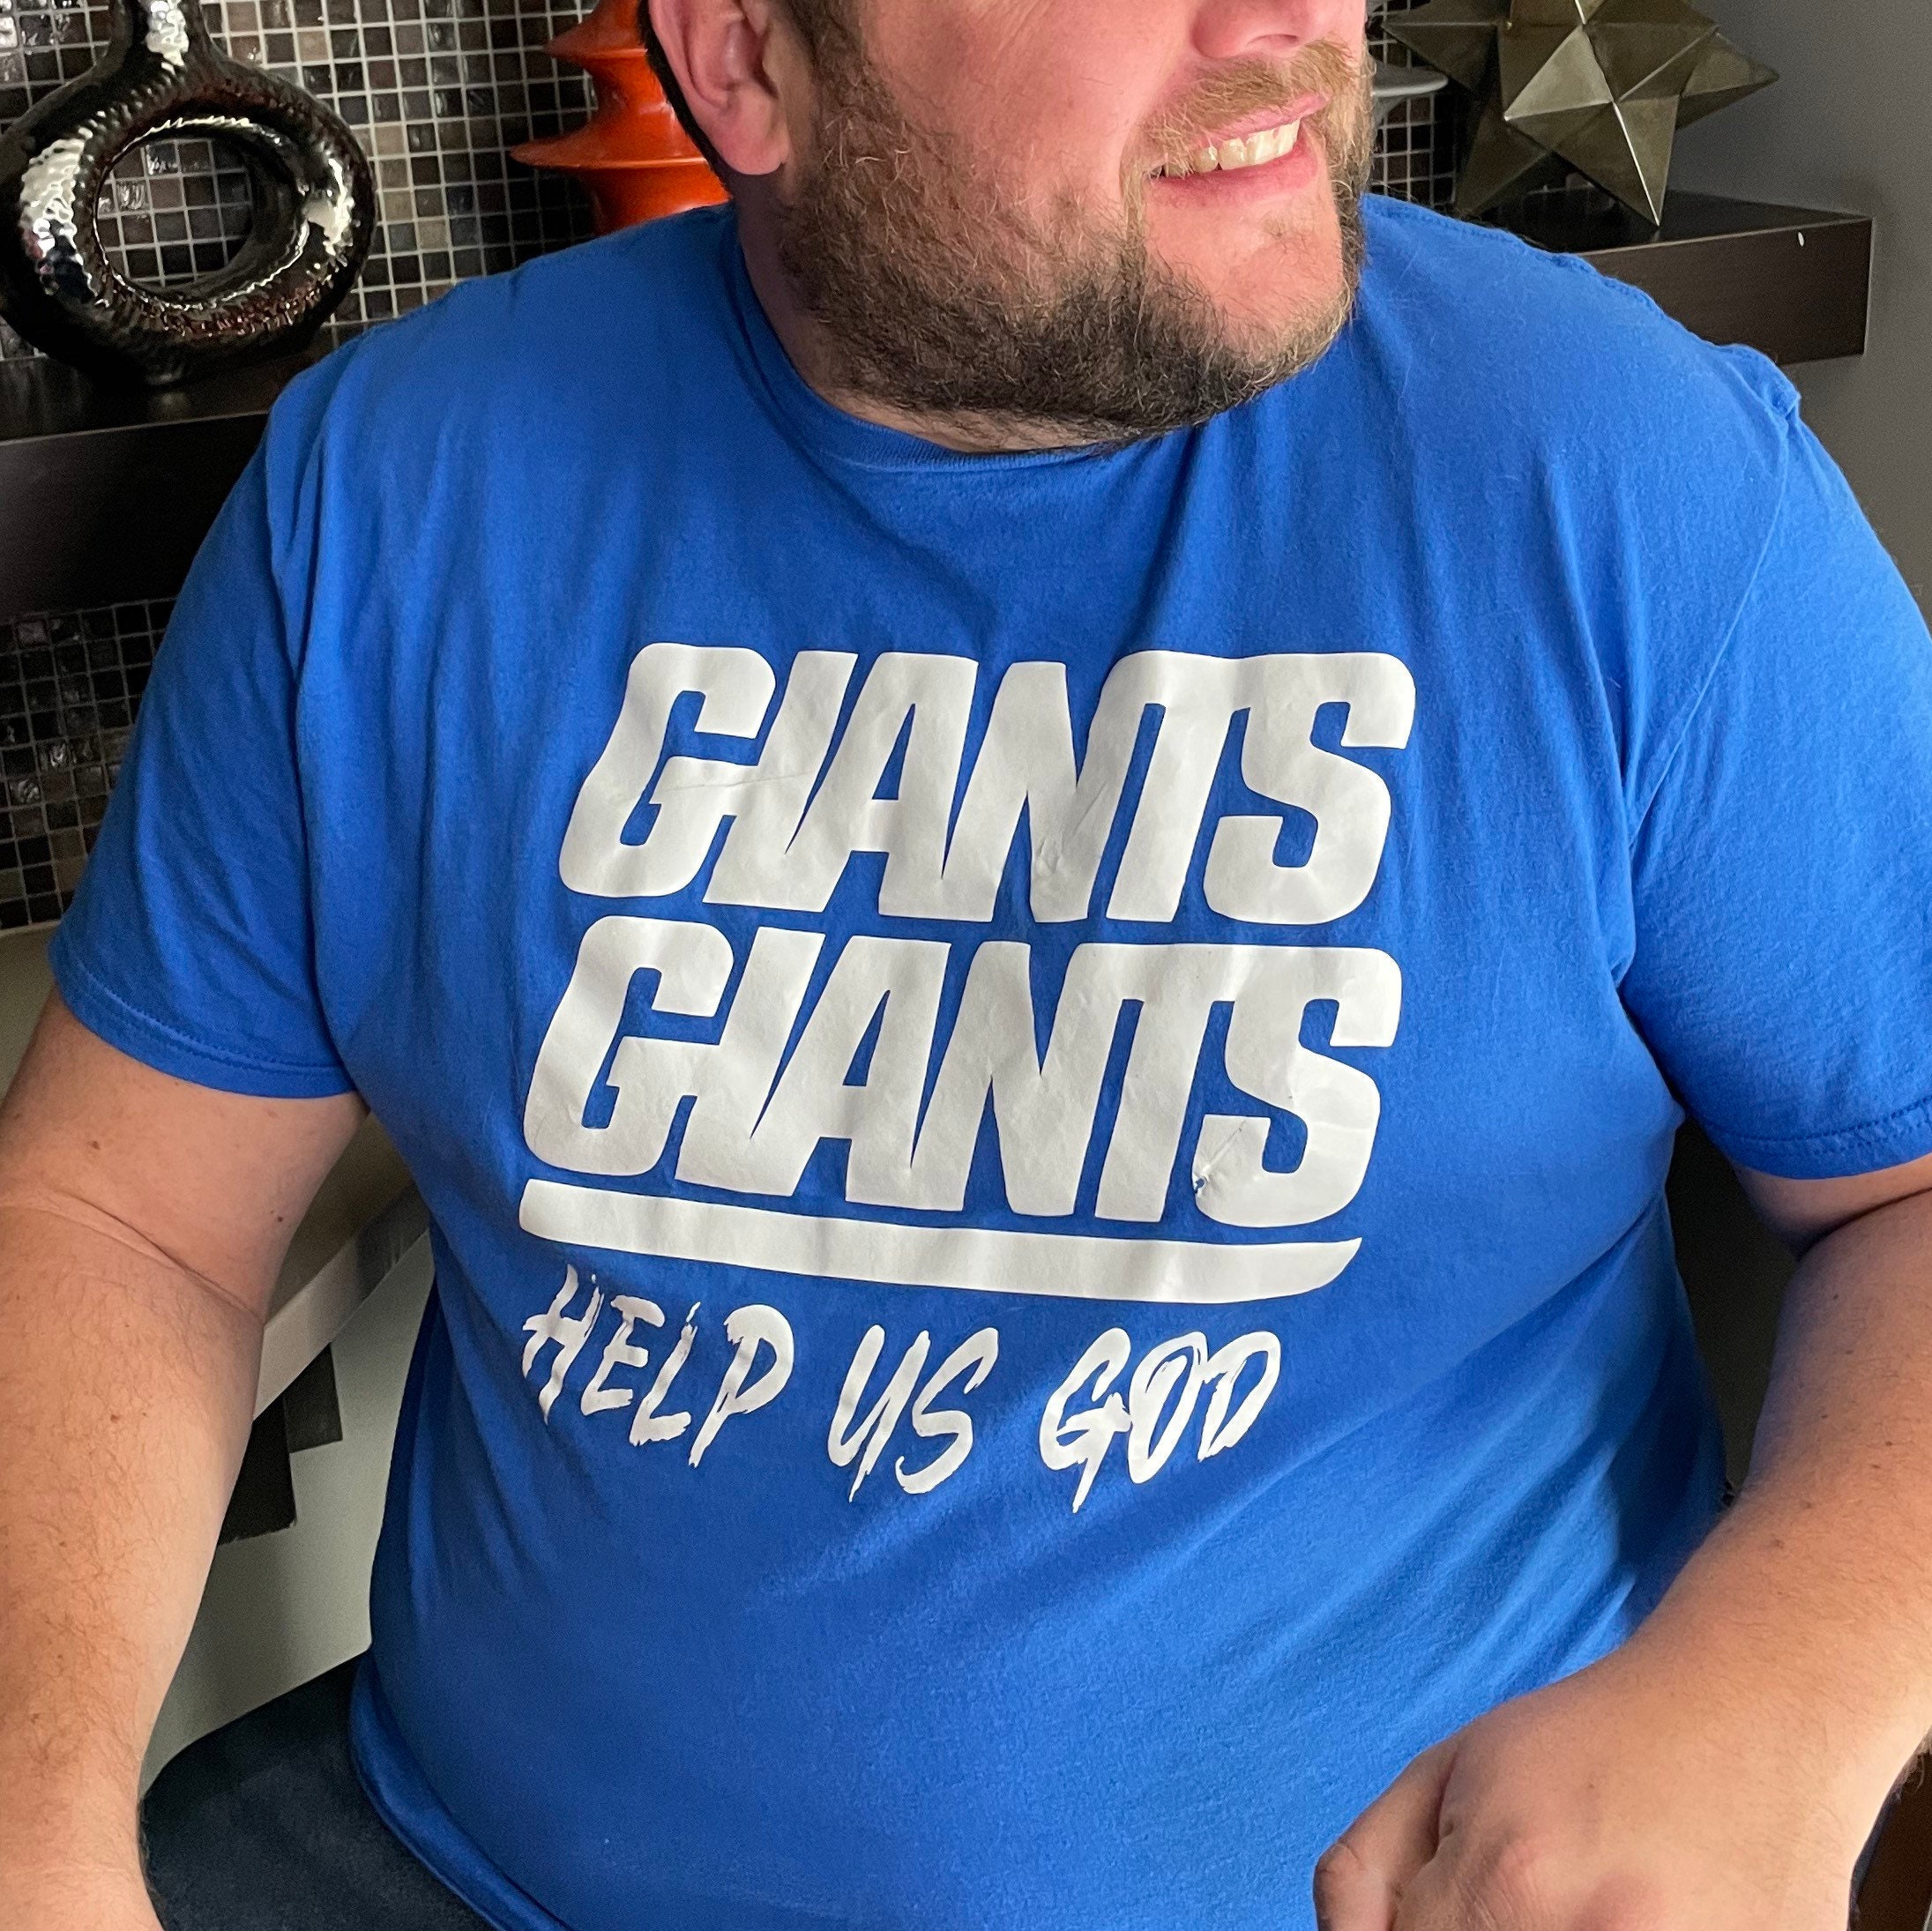 ny giants shirts for toddlers